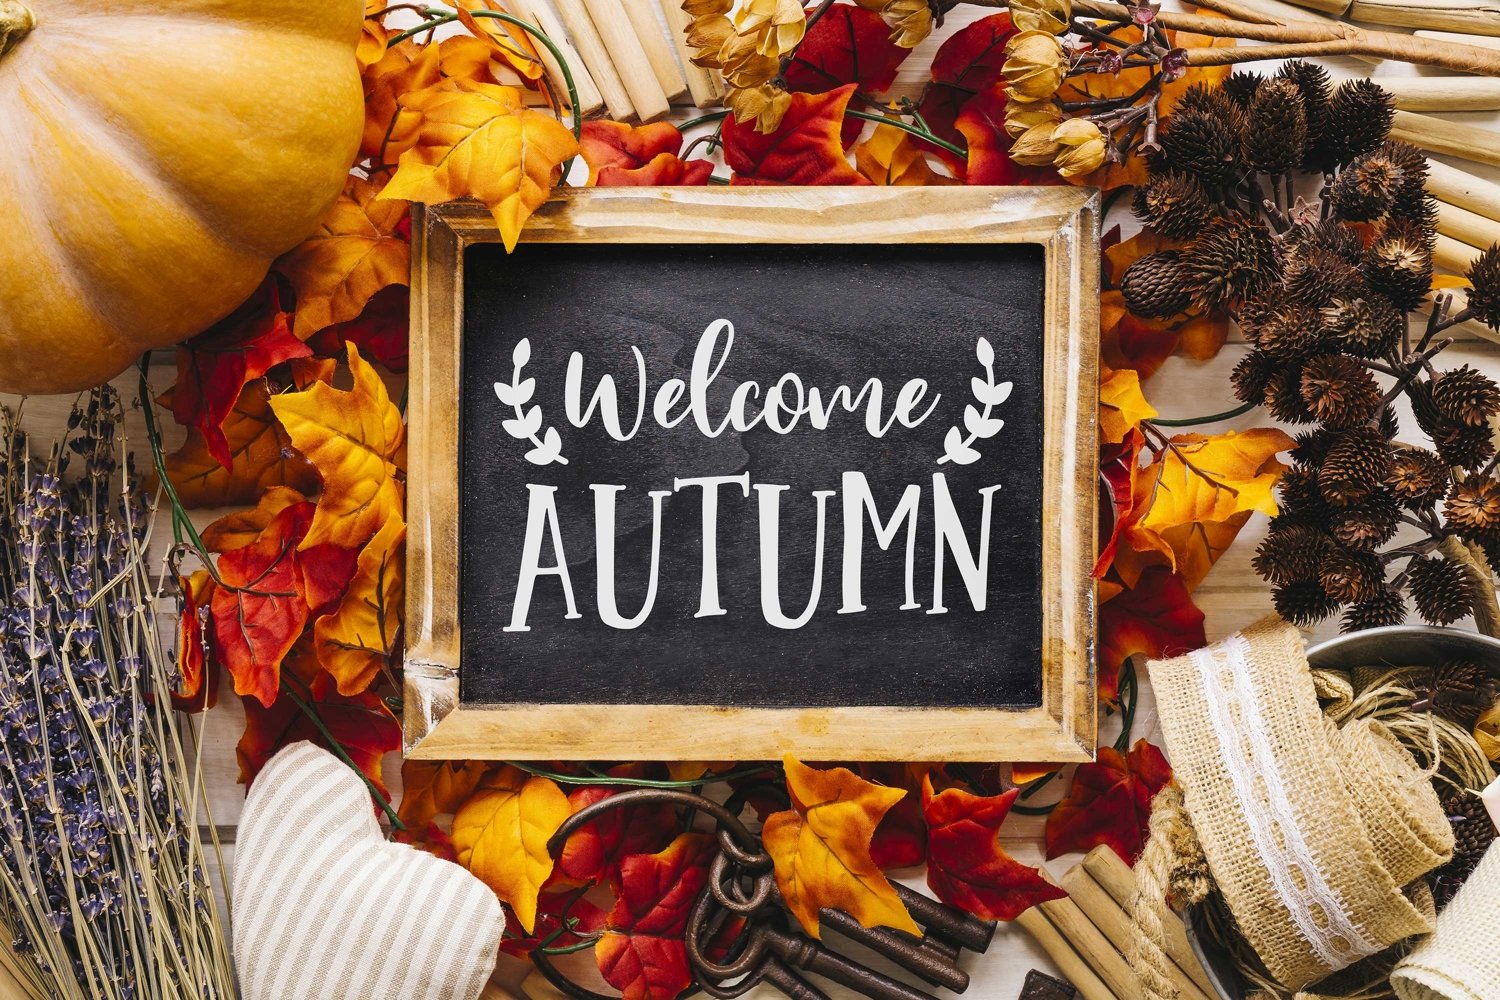 Welcome autumn frame.